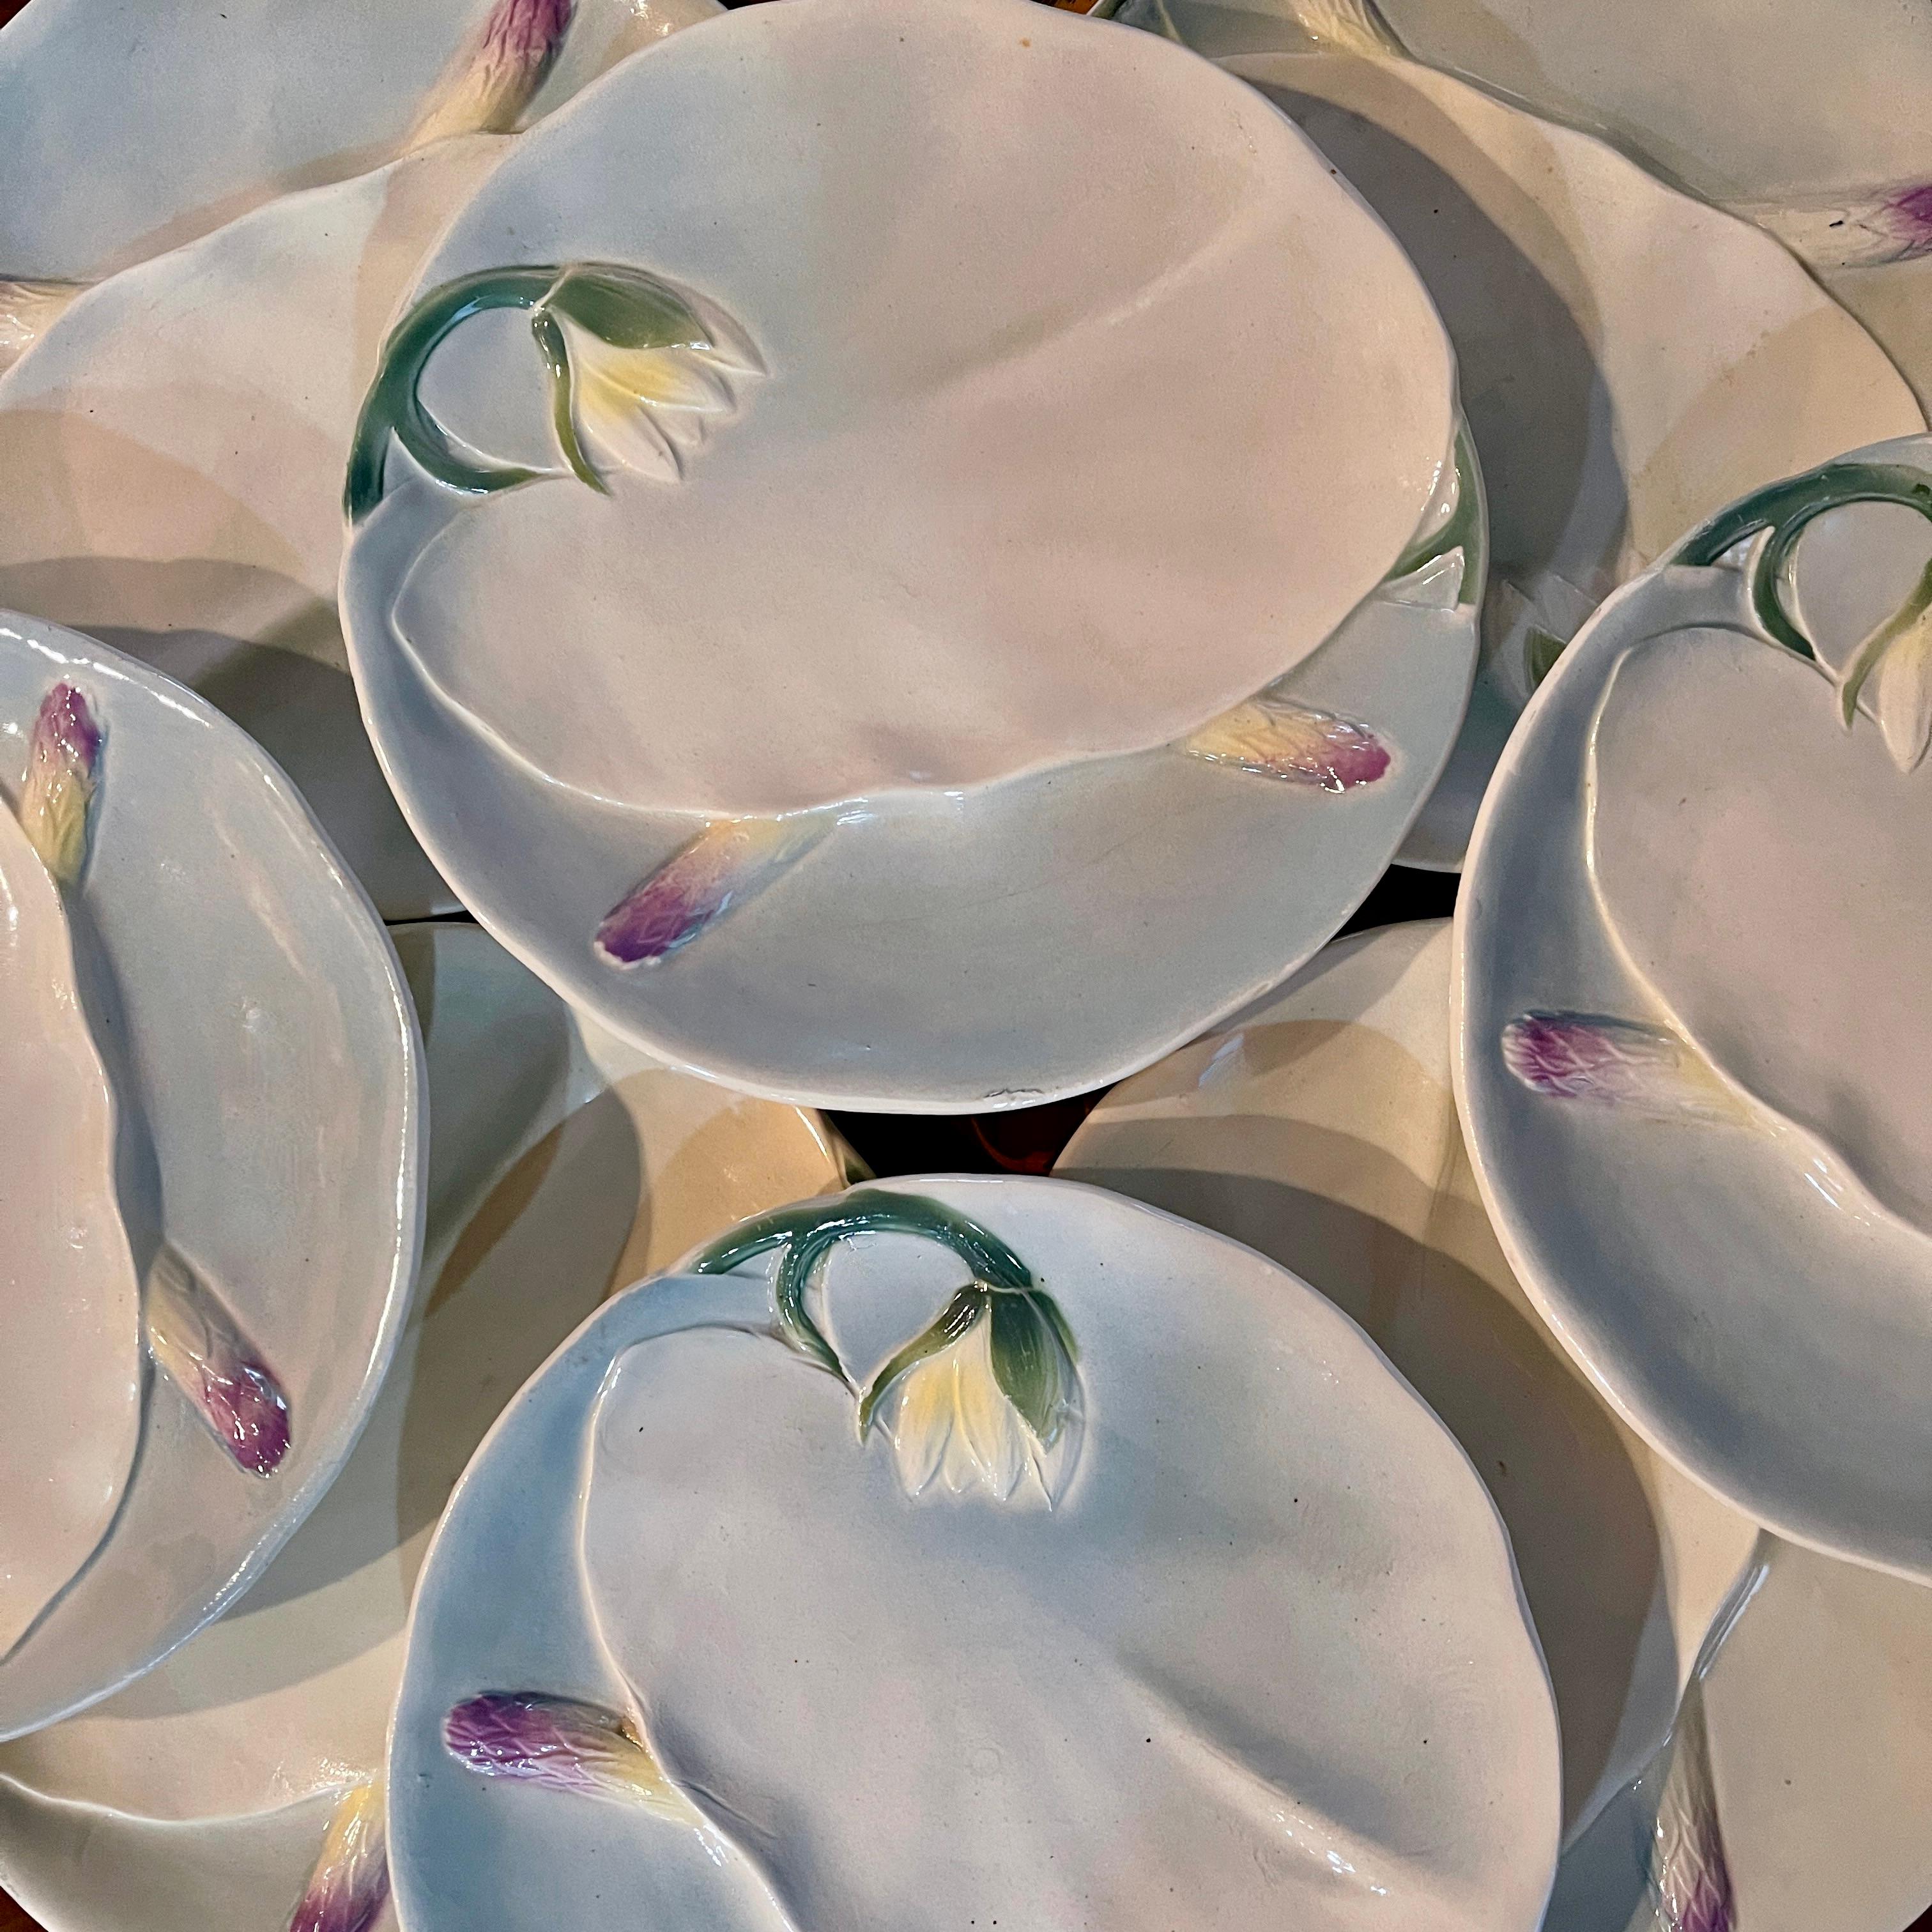 From the Keller and Guerin St. Clément faïencerie, a Water Lily themed Asparagus plate, France, circa 1900.
Soft water color like glazing distinguishes this Art Nouveau period Water Lily Asparagus plate. 
Formed as a Pond Lily leaf with a bloom,